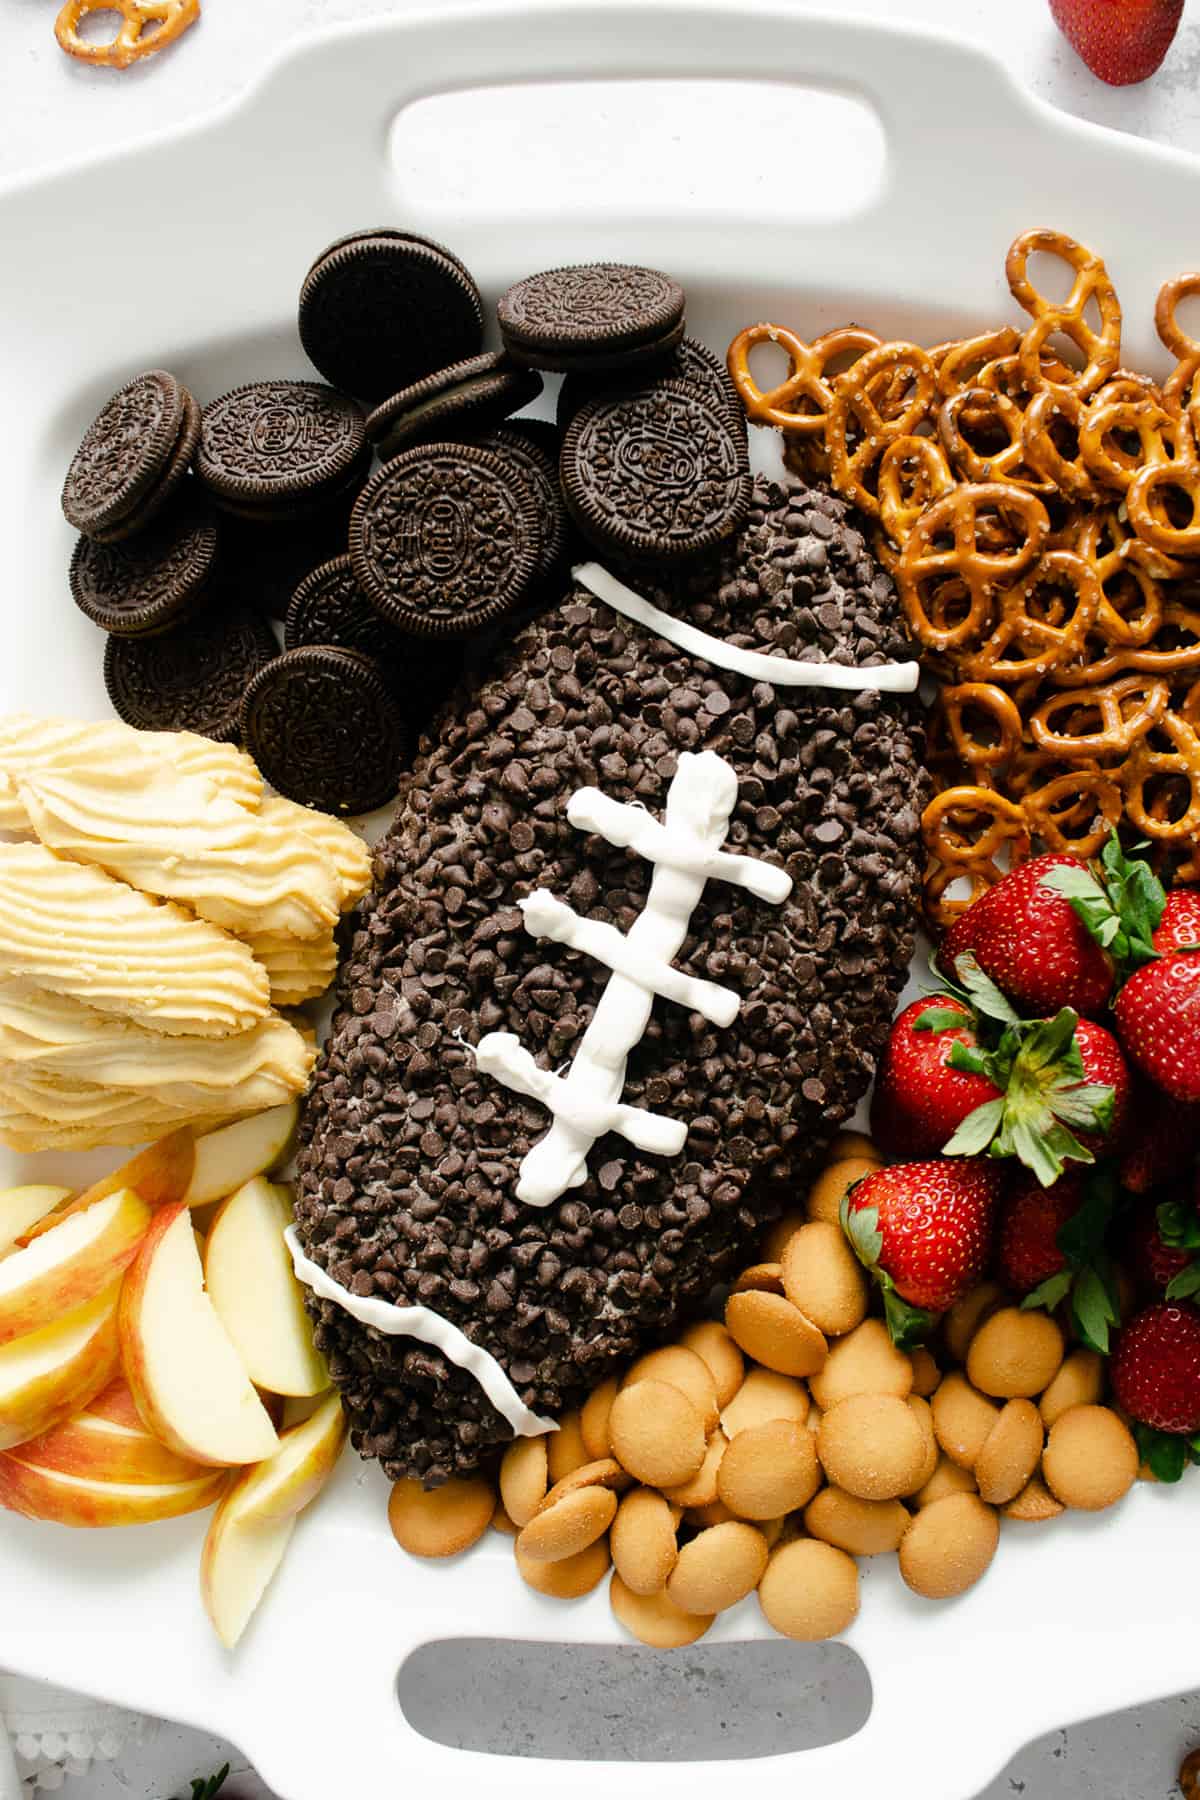 An Oreo cheesecake cheese ball decorated like a football for Game Day on a platter with pretzels, strawberries, and cookies for dipping.